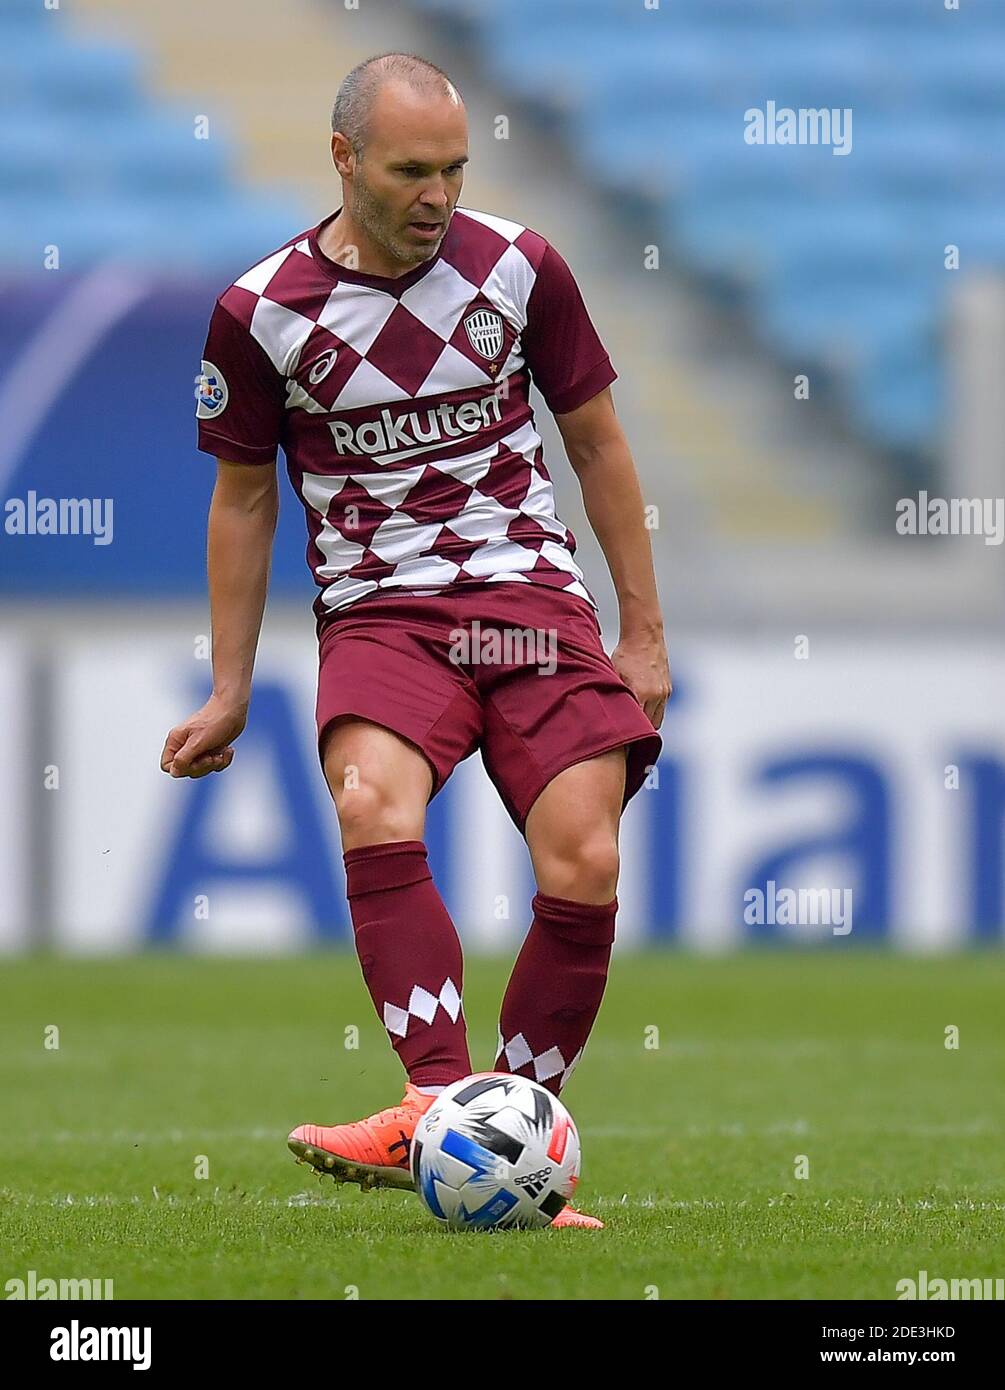 Doha, Qatar. 28th Nov, 2020. Andres Iniesta of Vissel Kobe passes the ball during a Group G football match of the AFC Champions League between Guangzhou Evergrande FC and Vissel Kobe in Doha, Qatar, Nov. 28, 2020. Credit: Nikku/Xinhua/Alamy Live News Stock Photo